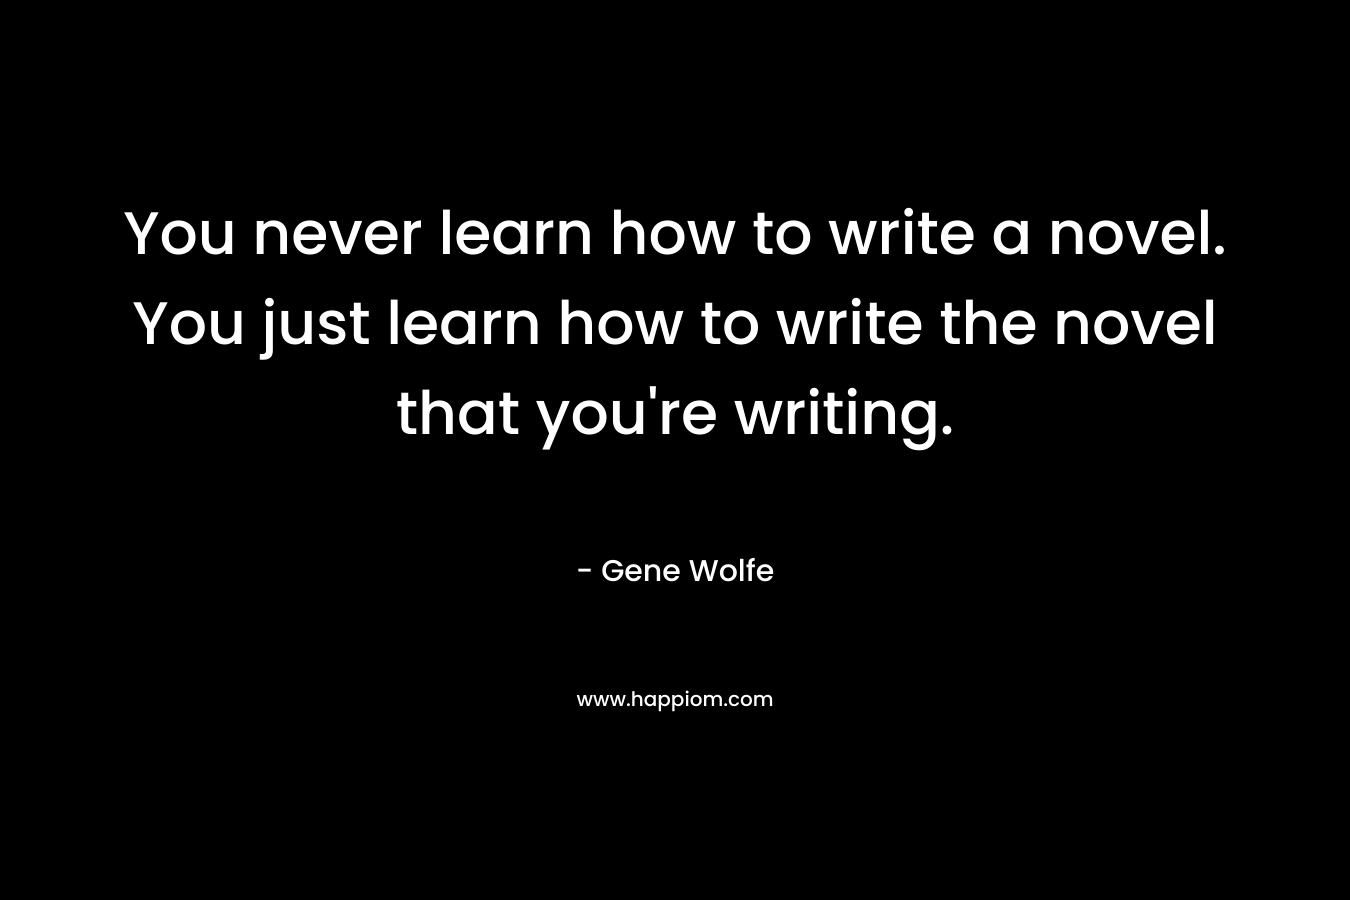 You never learn how to write a novel. You just learn how to write the novel that you're writing.